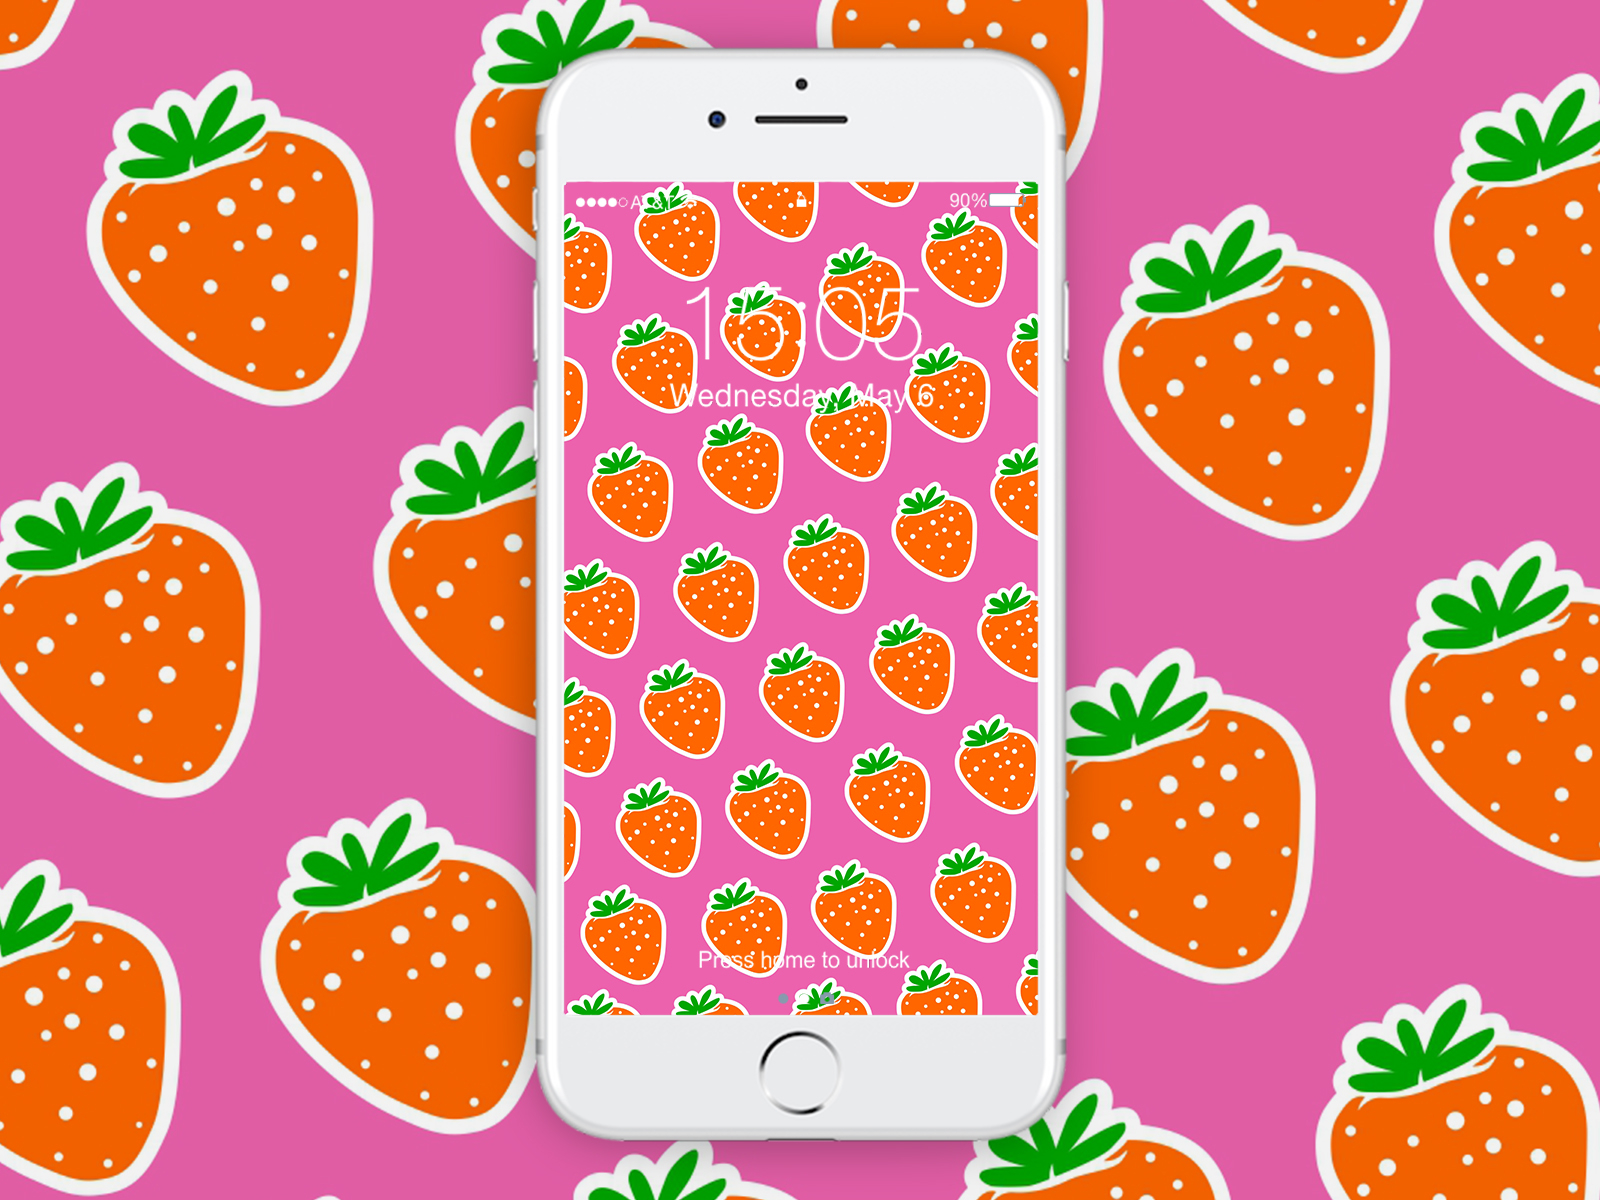 strawberry tumblr backgrounds